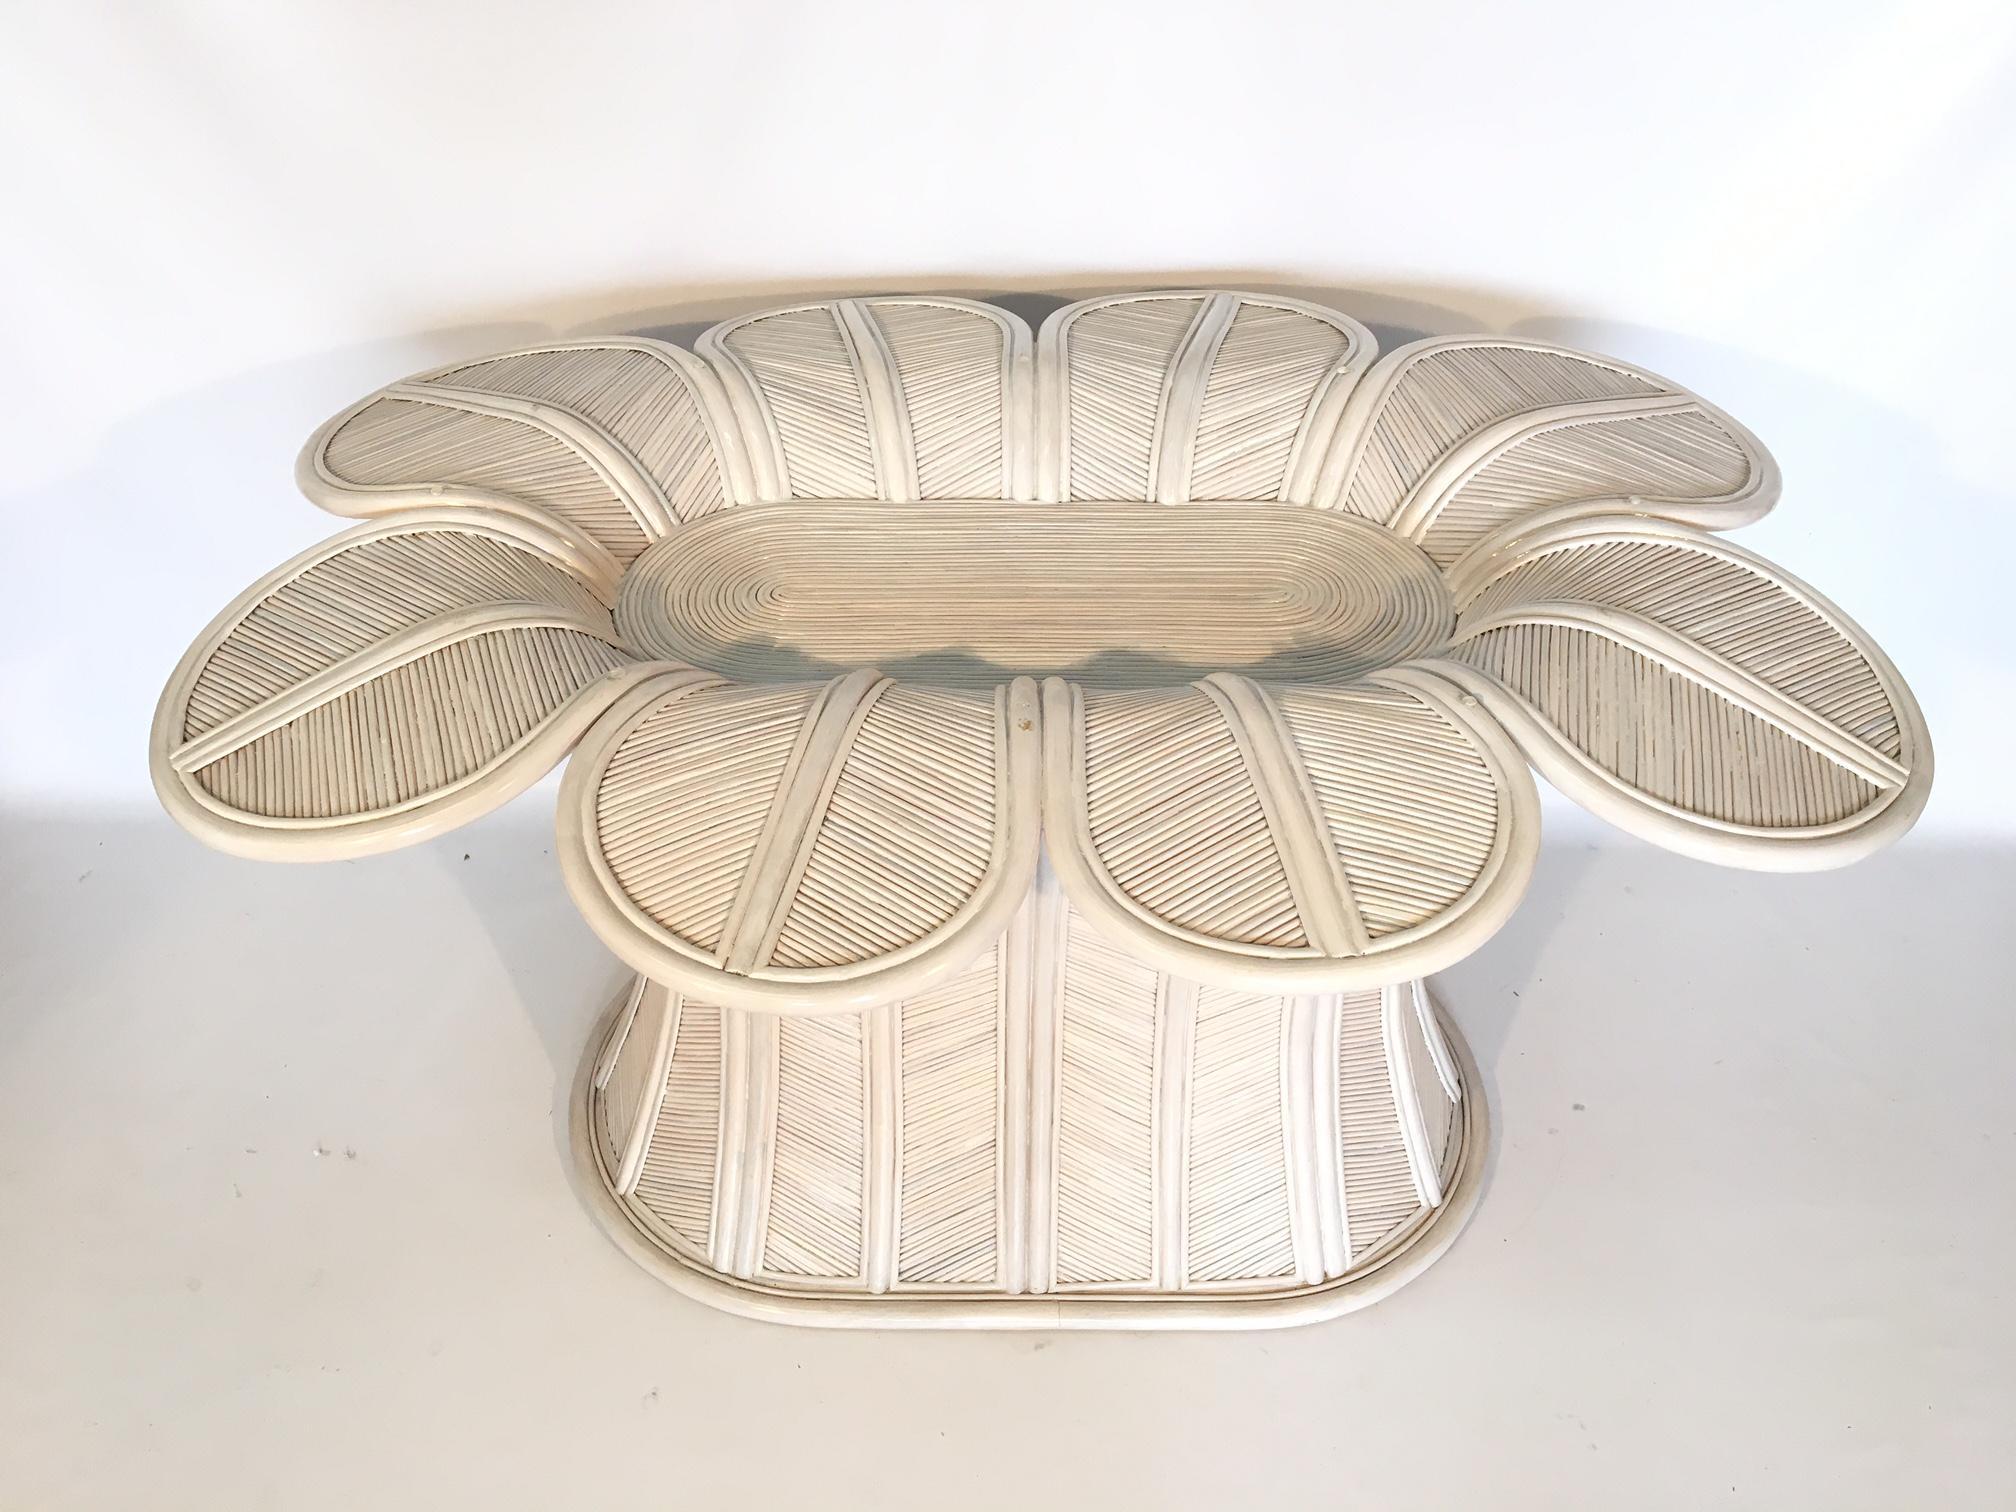 Large bell flower table base in pencil reed rattan in excellent vintage condition. Add your glass top for a beautiful vintage Florida statement piece.